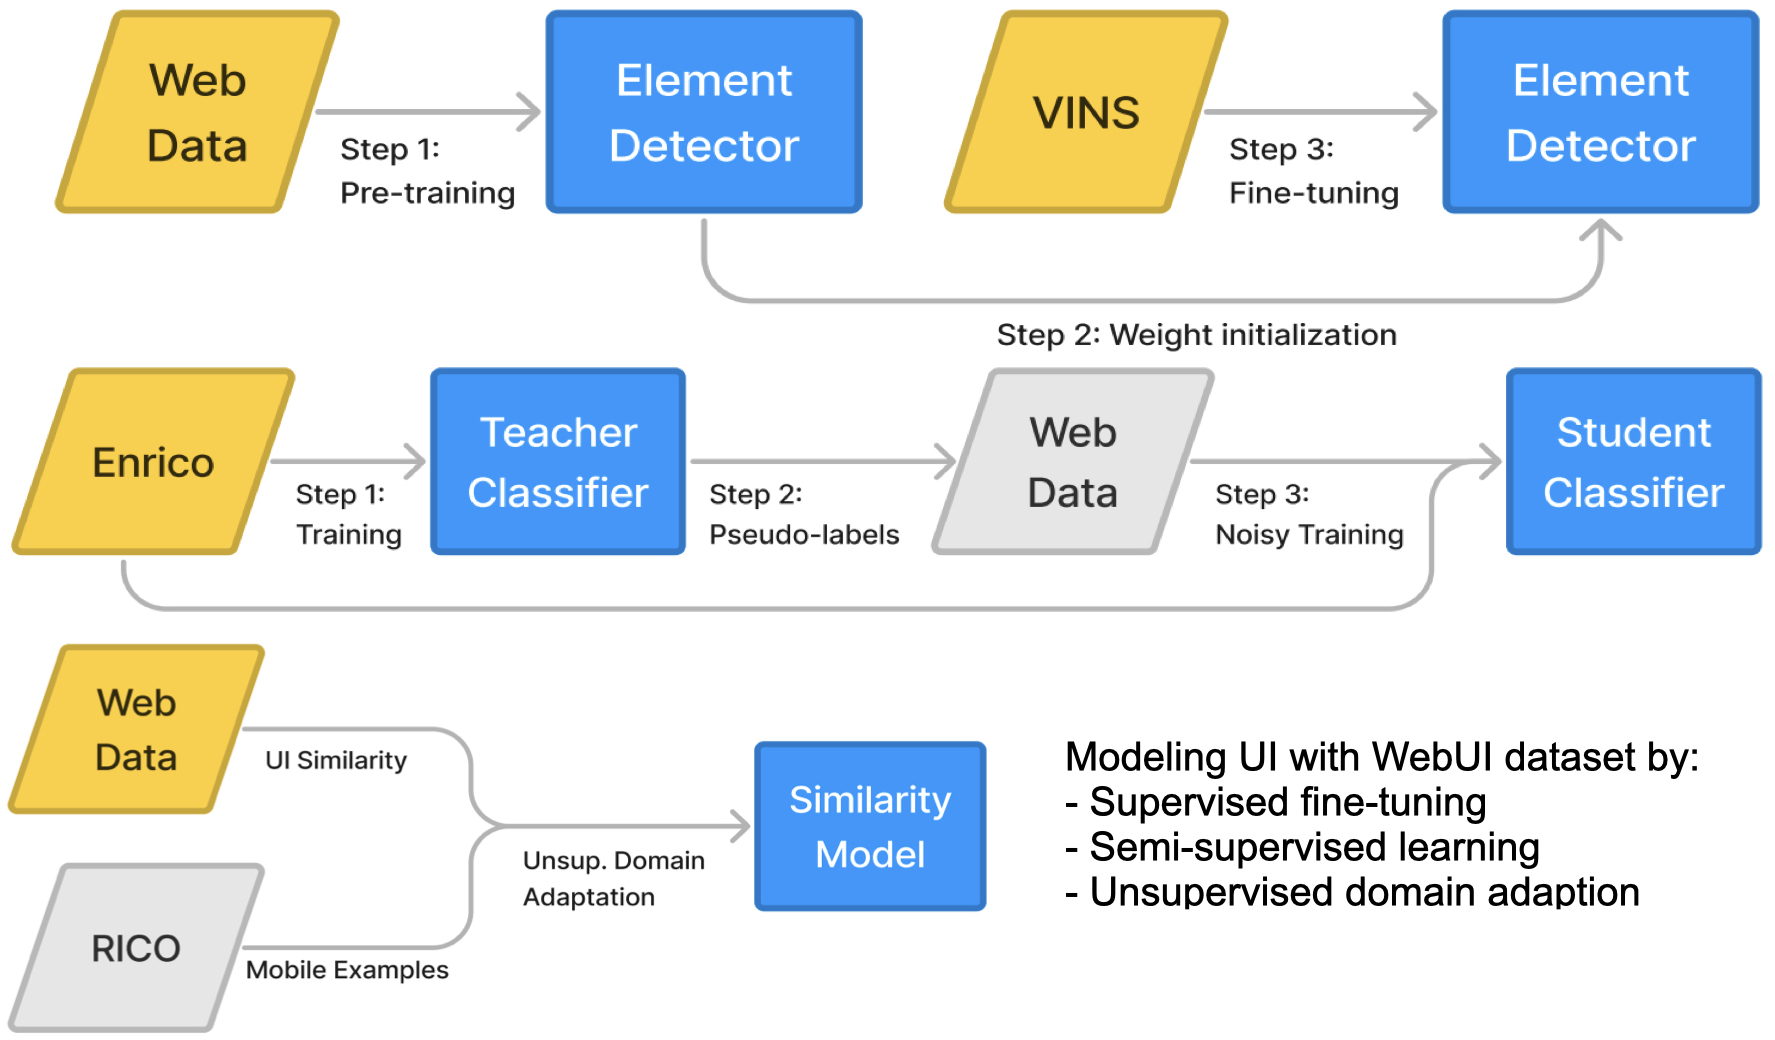 Image Description - This figure contains three flow charts showing the process of learning trasnferrable UI semantics with WebUI. The top part is a flow chart demonstrating how inductive transfer learning is applied to element detection. First web data is used to pre-train an element detector. The weights are used to initialize a new model, which is then fine-tuned on the down-stream VINS dataset. The middle part is a flow chart presenting how semi-supervised learning is applied to screen classification. First the Enrico mobile dataset is used to train a teacher classifier. The teacher classifier labels web data. Finally, both mobile and web data are used to train a student classifier using a noisy training strategy. The bottom part is a flow char showing that by using unsupervised domain adaptation (UDA), we can train a screen similarity model that predicts relationships between pairs of web pages and mobile app screens. The training uses web data from WebUI to learn similarity between screenshots using their associated URLs. Unlabeled data from Rico is used to train an domain-adversarial network, which guides the main model to learn features that transferrable from web pages to mobile screens.